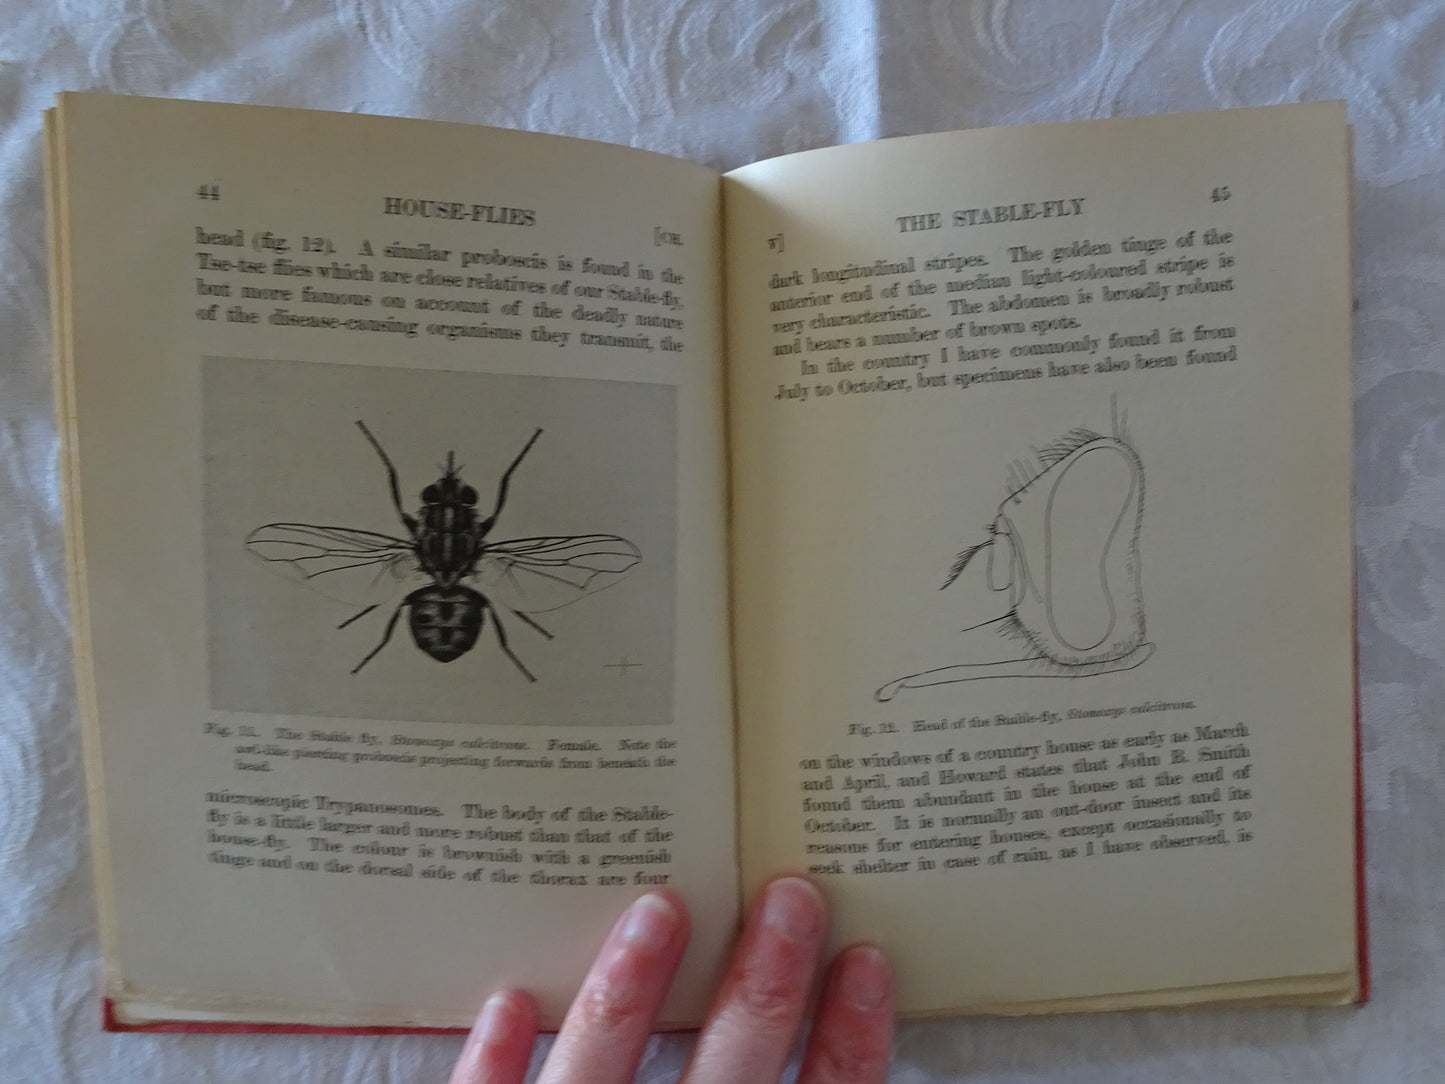 House-Flies And How They Spread Disease by C. G. Hewitt